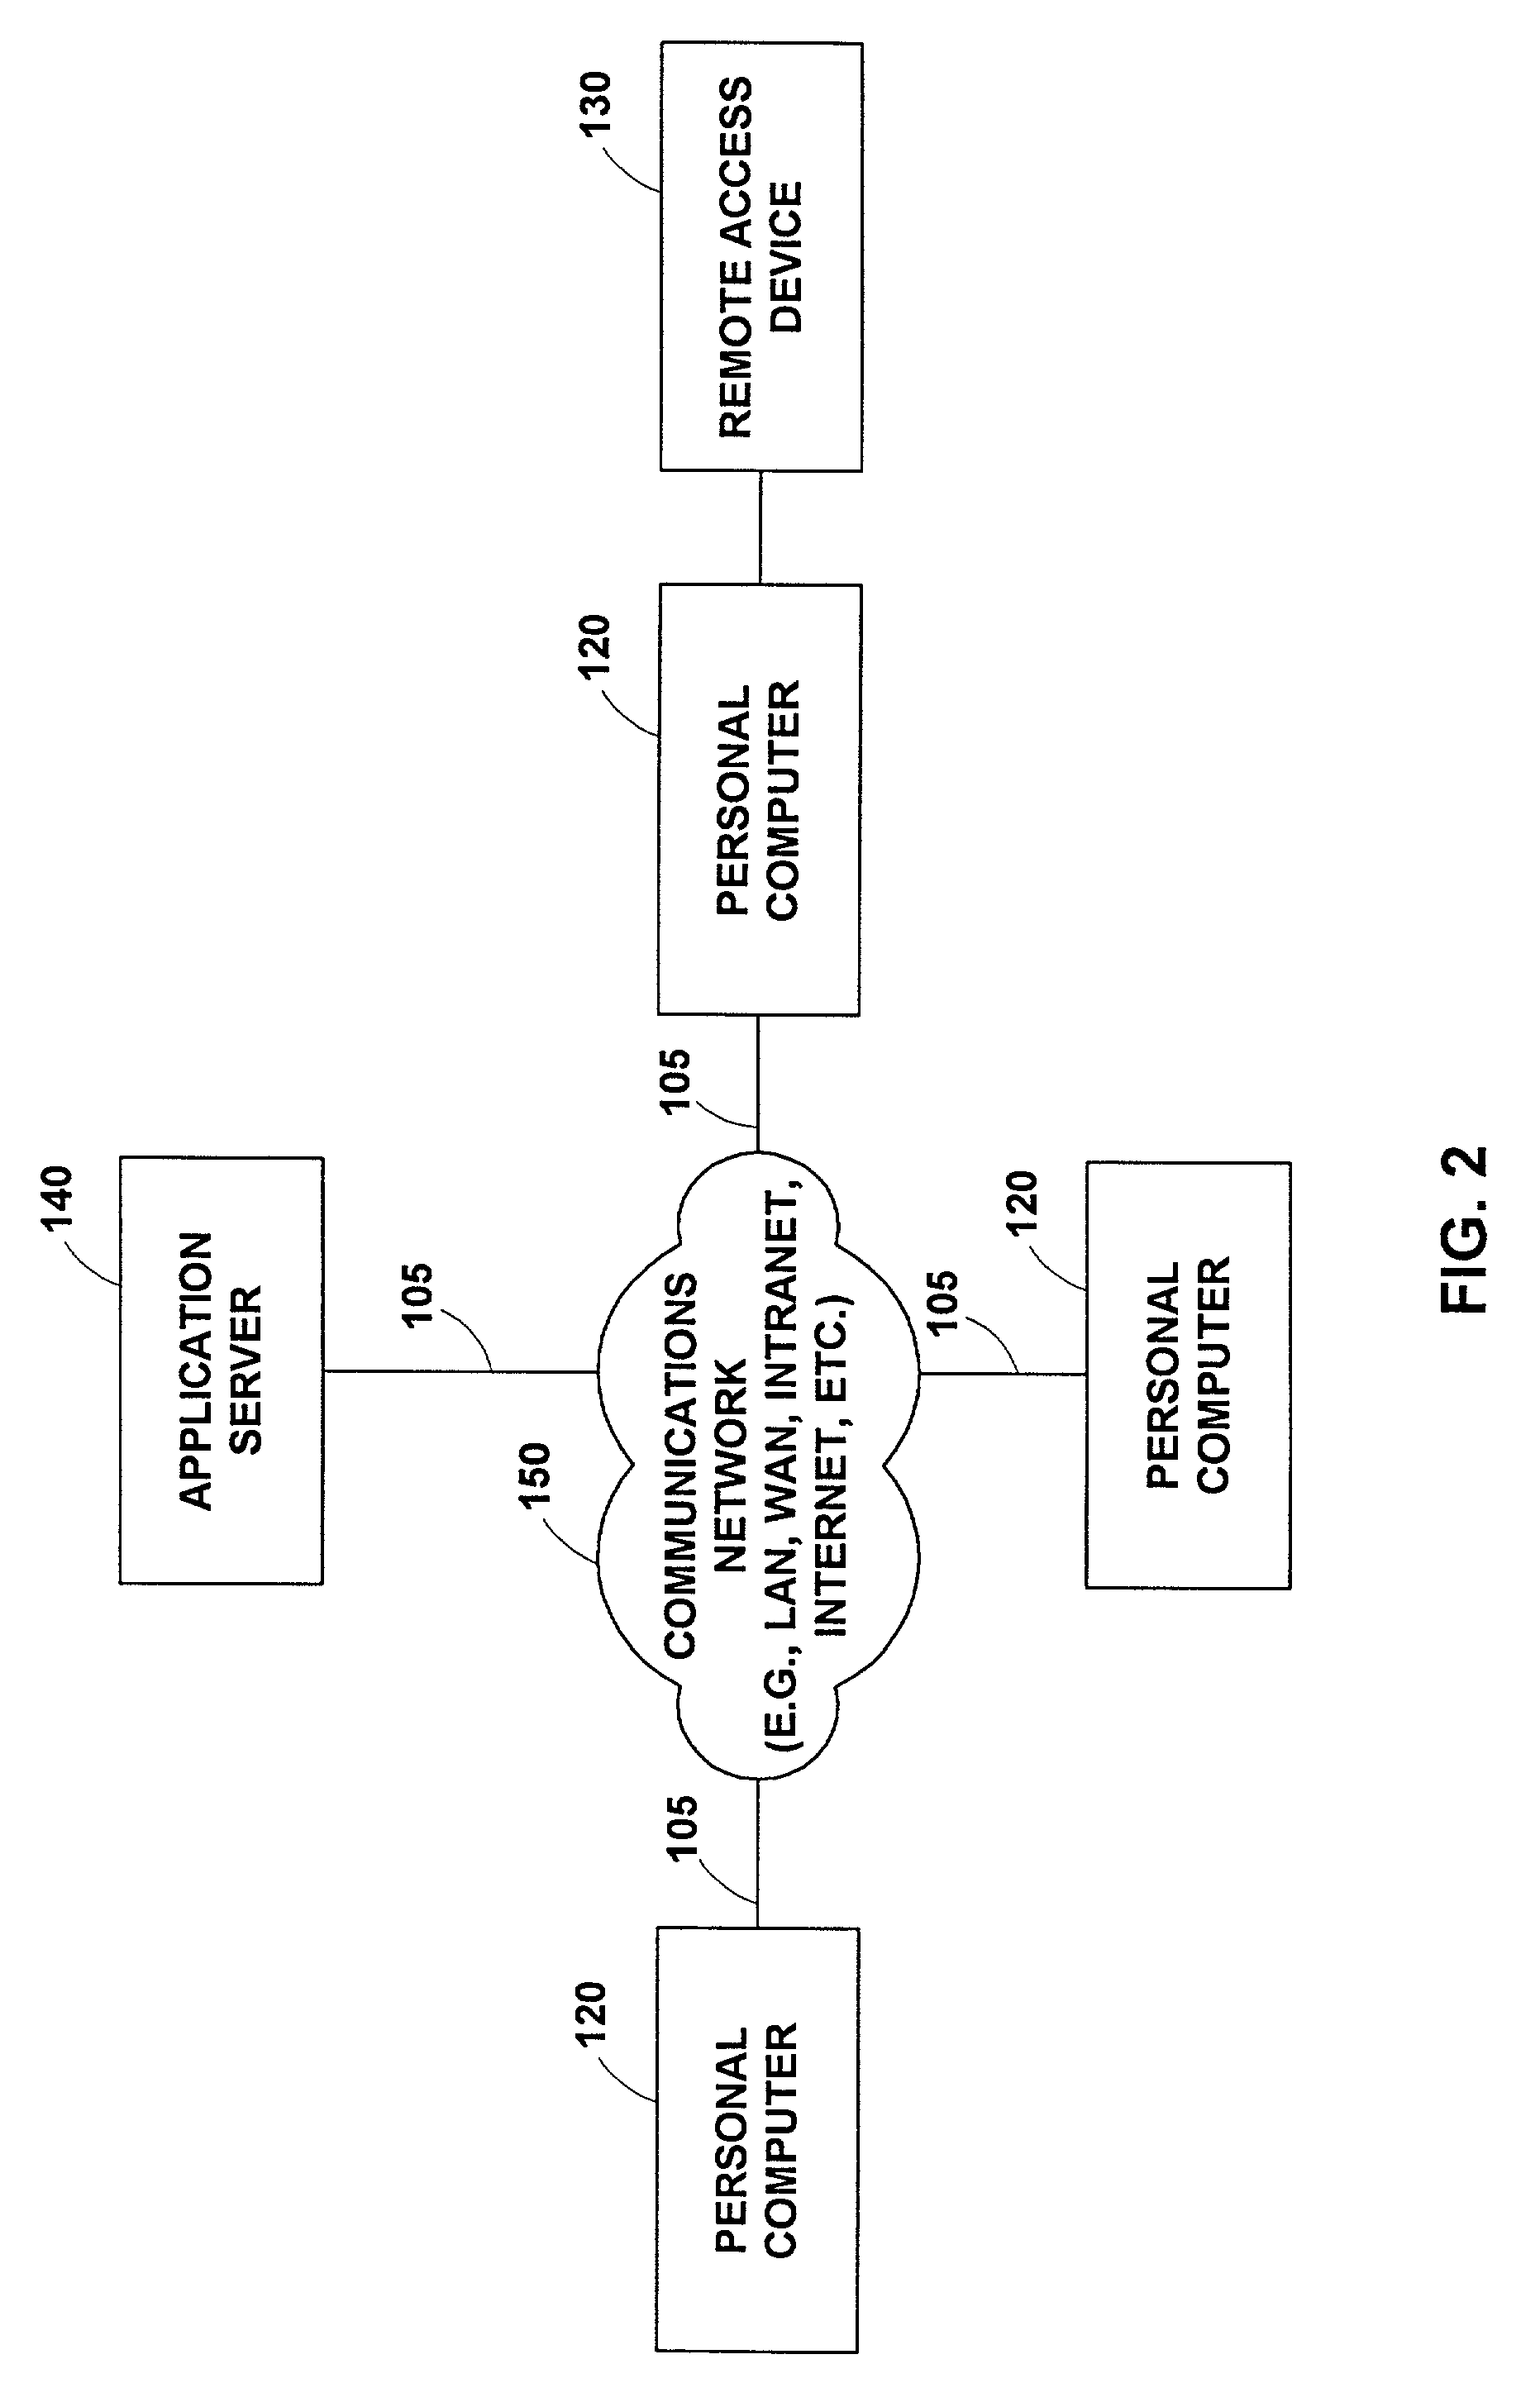 Systems and methods for performing parametric searches